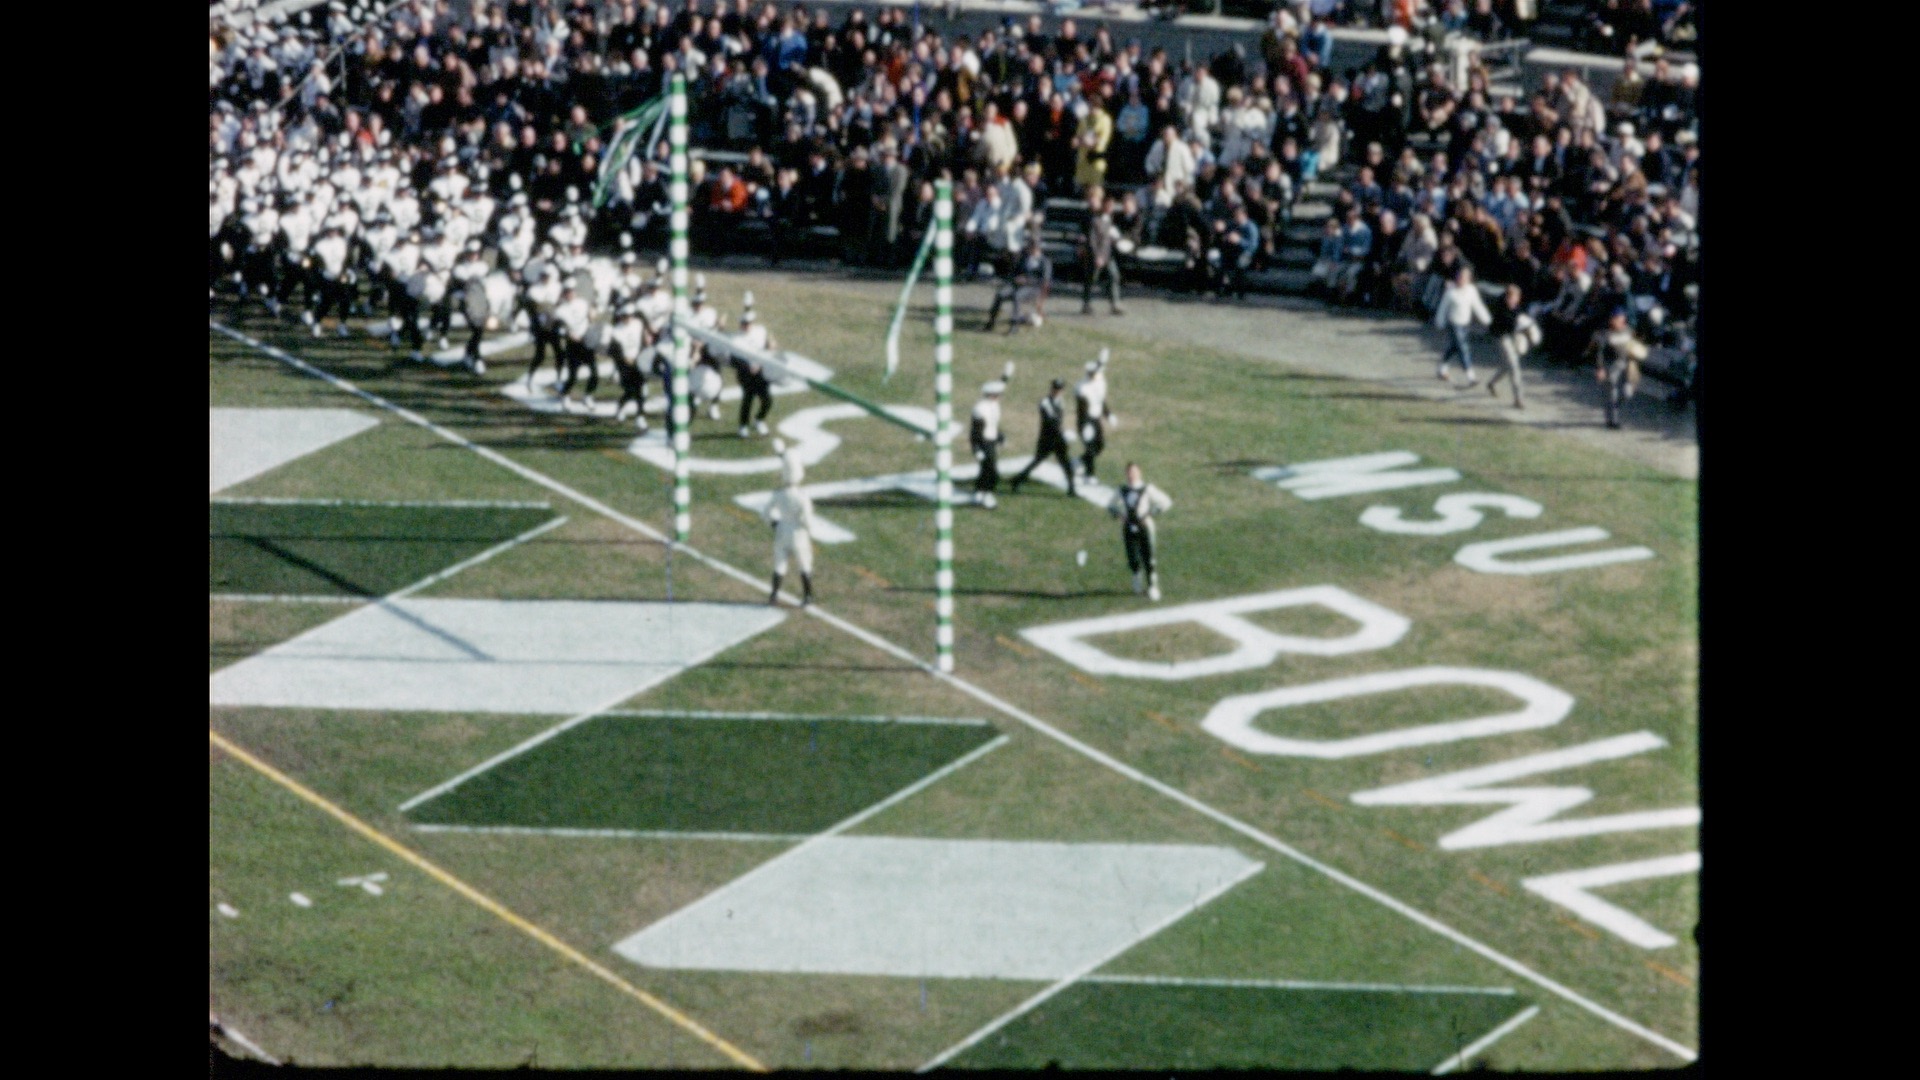 Spartan Marching Band: Rose Bowl, 1966